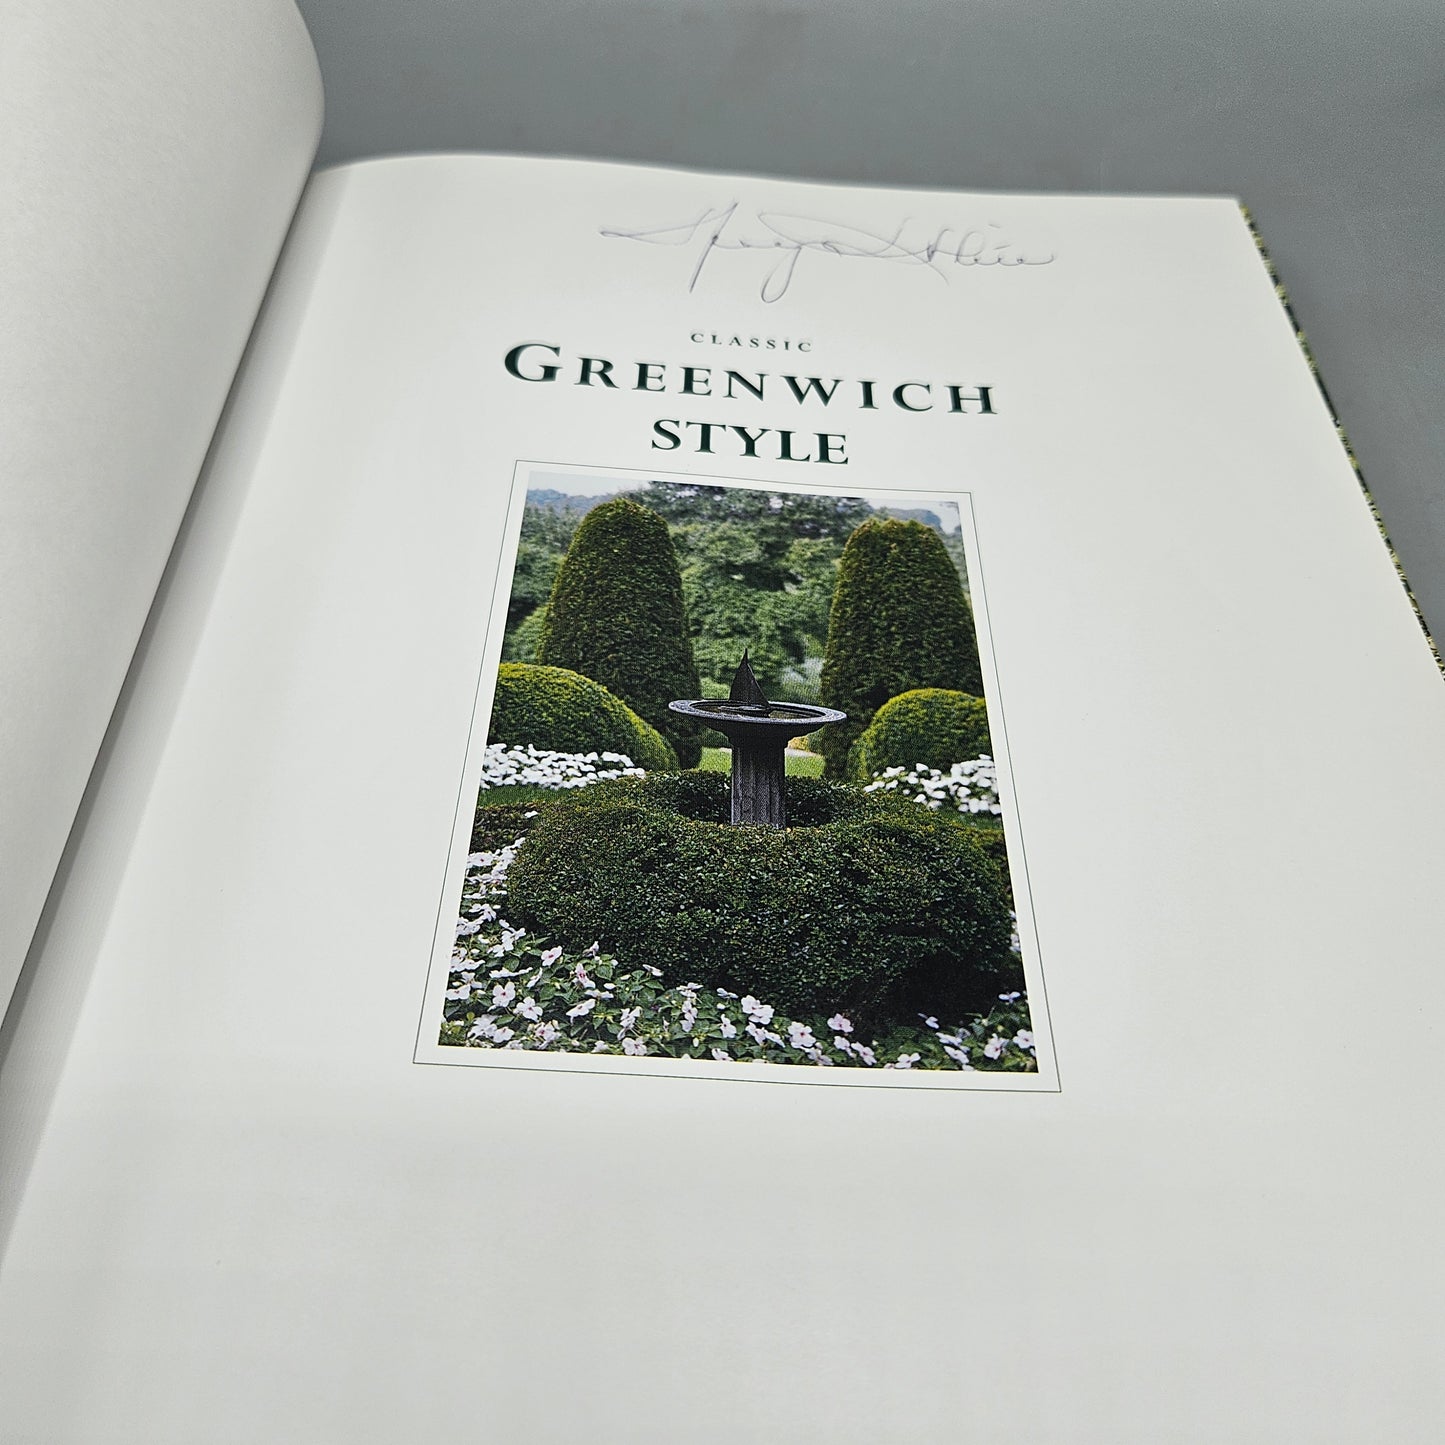 Book: Classic Greenwich Style by Cindy Rinfret